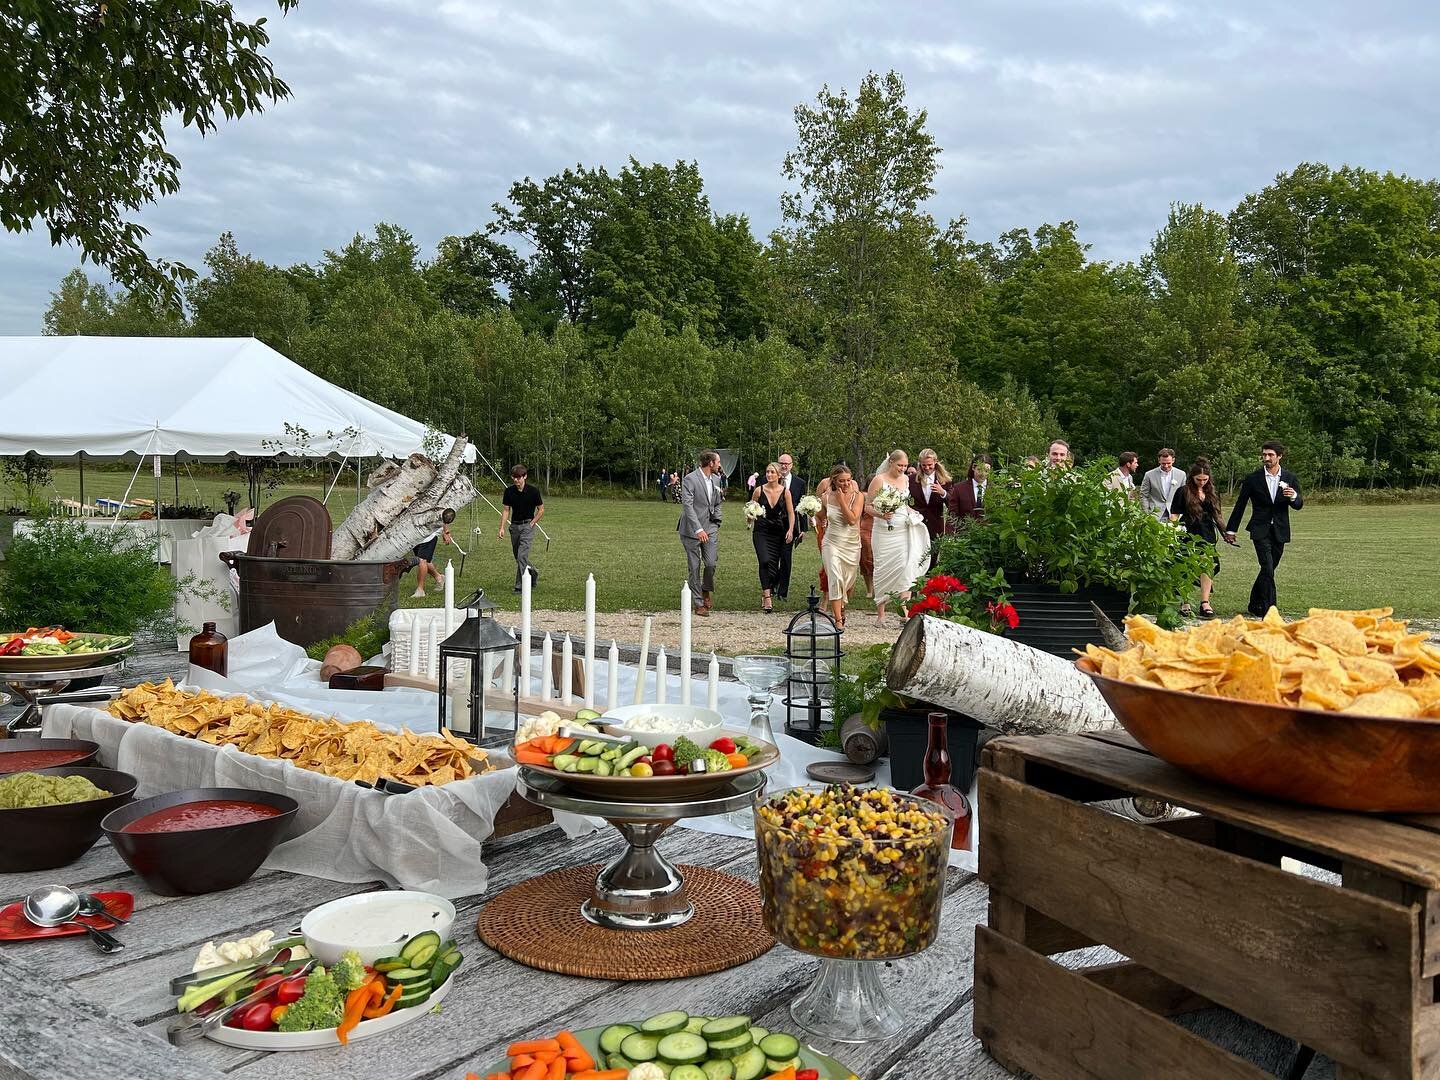 First time setting up appetizers on a wagon! This outdoor wedding in Lake City was so well planned and decorated! 
.
They later had tacos for dinner which is always a sign of excellent planning 🌮 ❤️